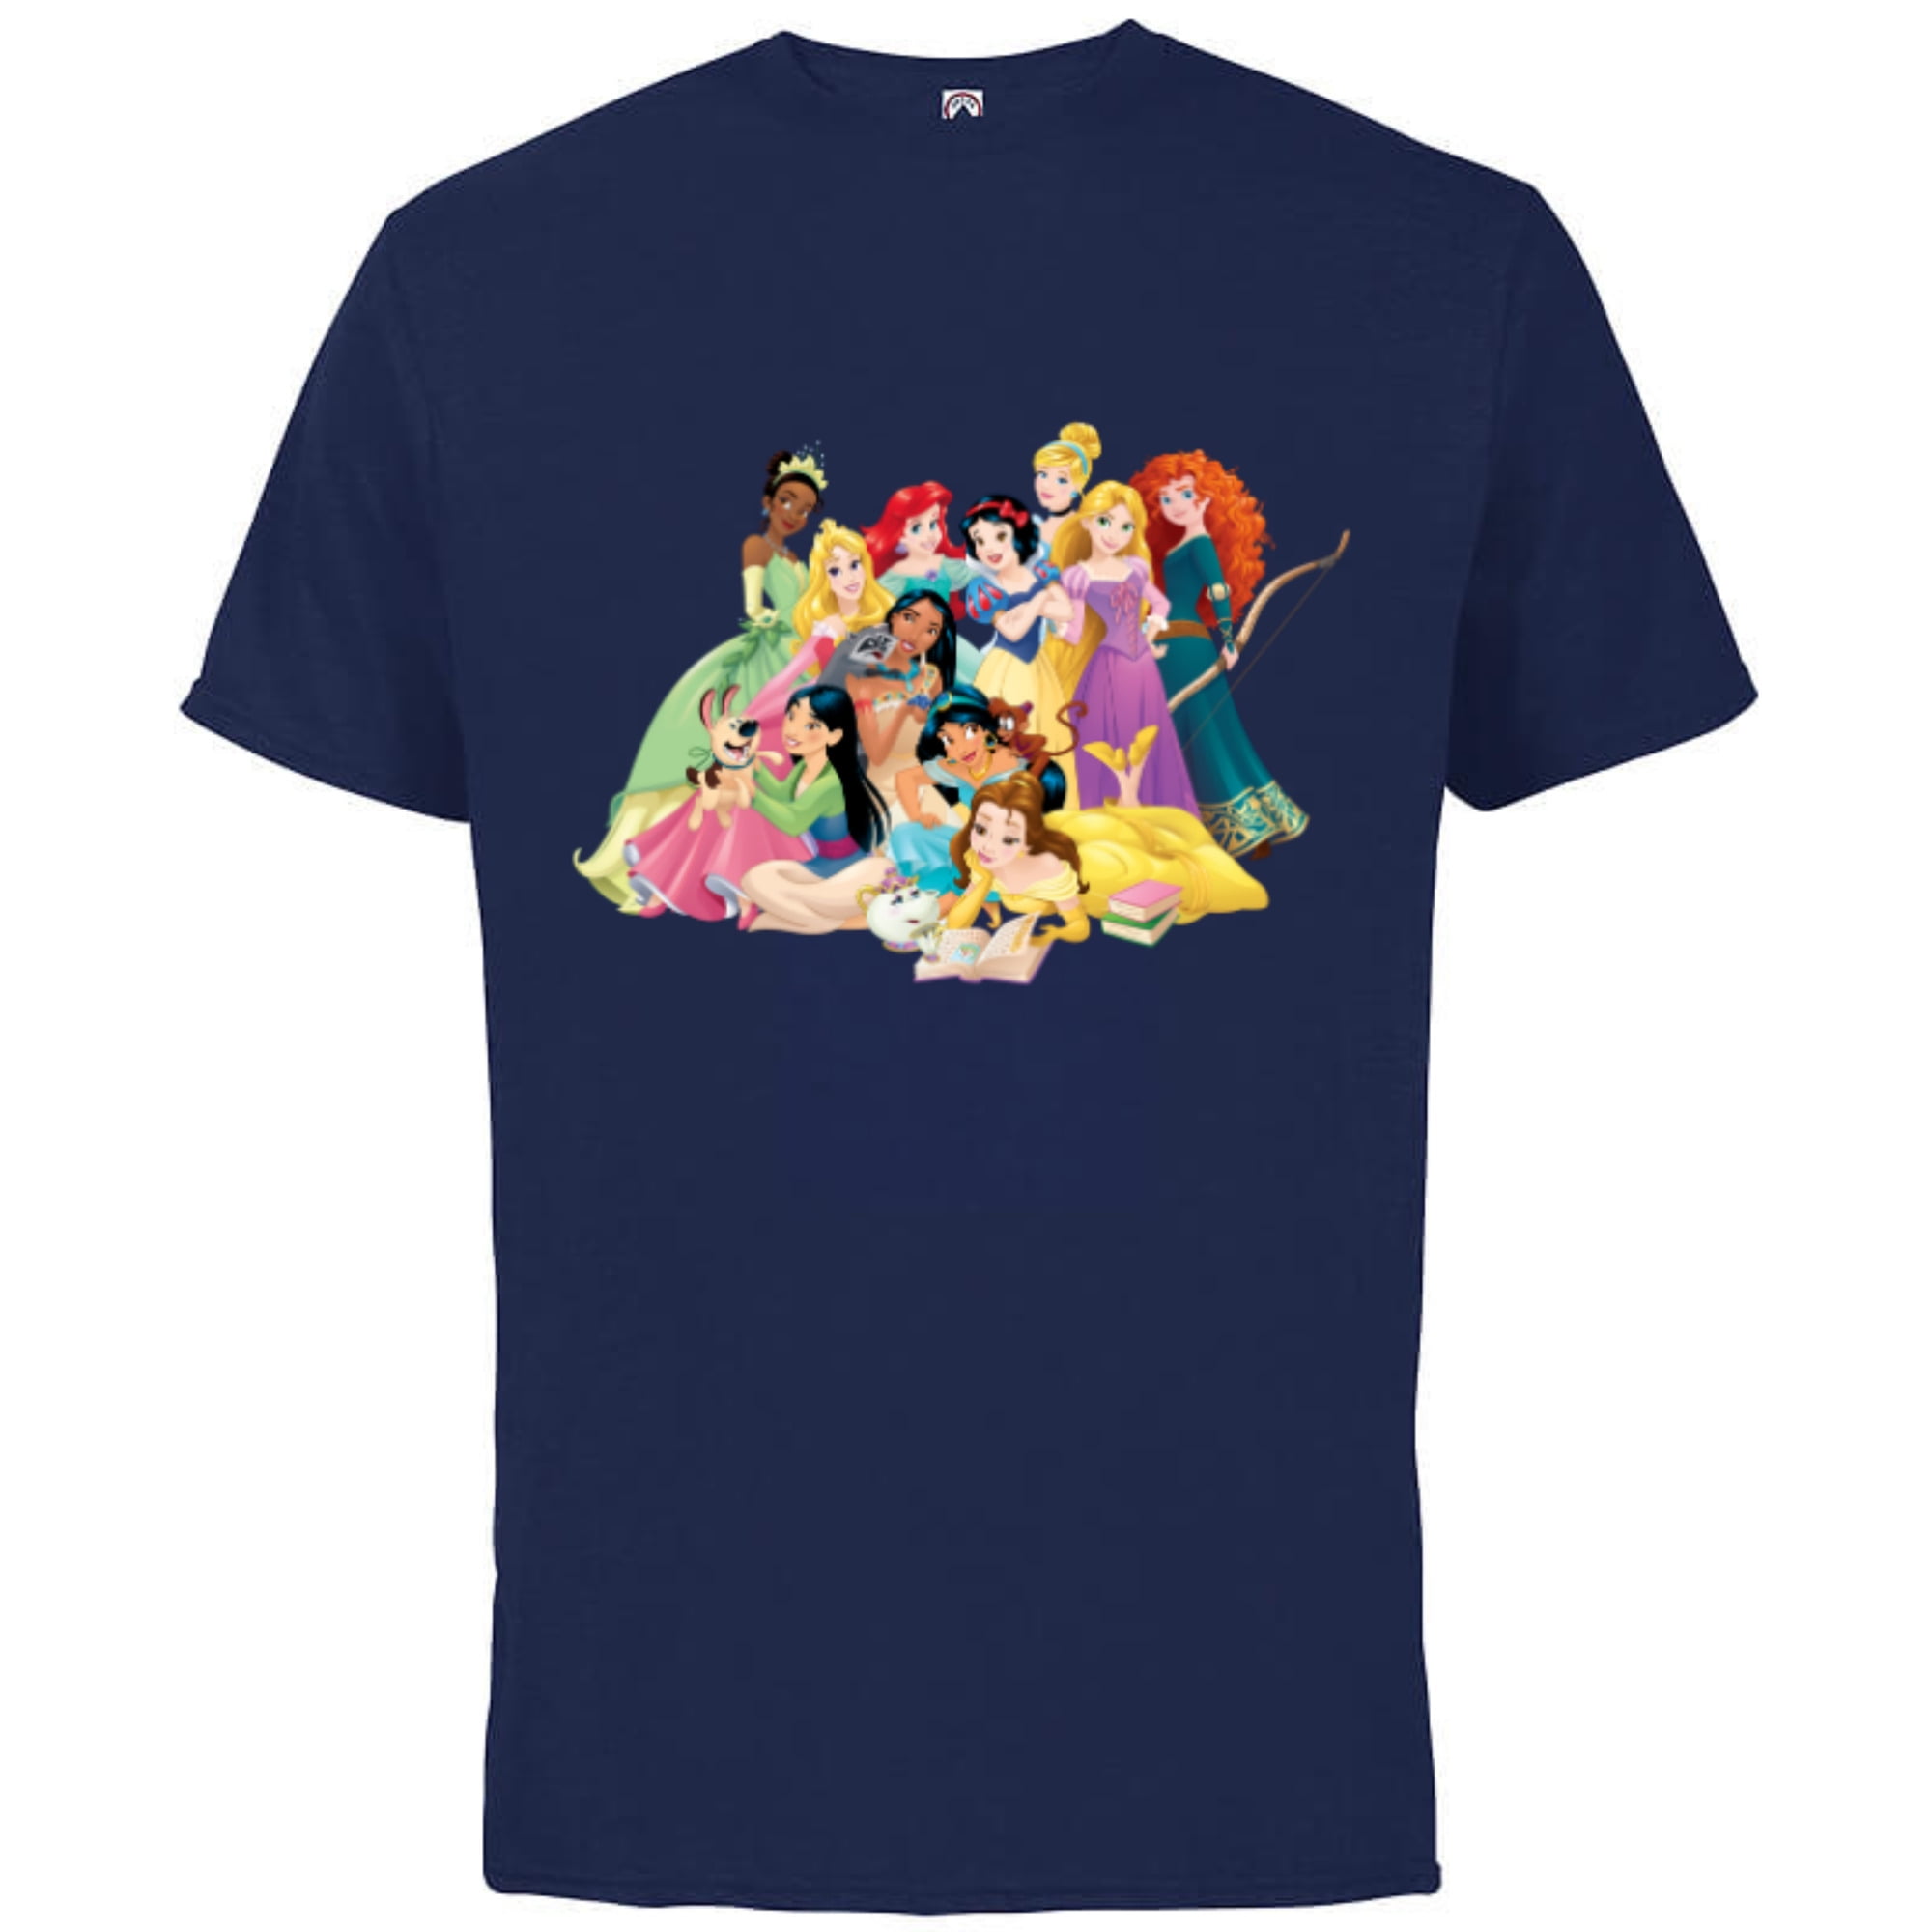 Disney Princess Group Photo Sleeve Adults- Short - Customized-Athletic T-Shirt Navy for Cotton